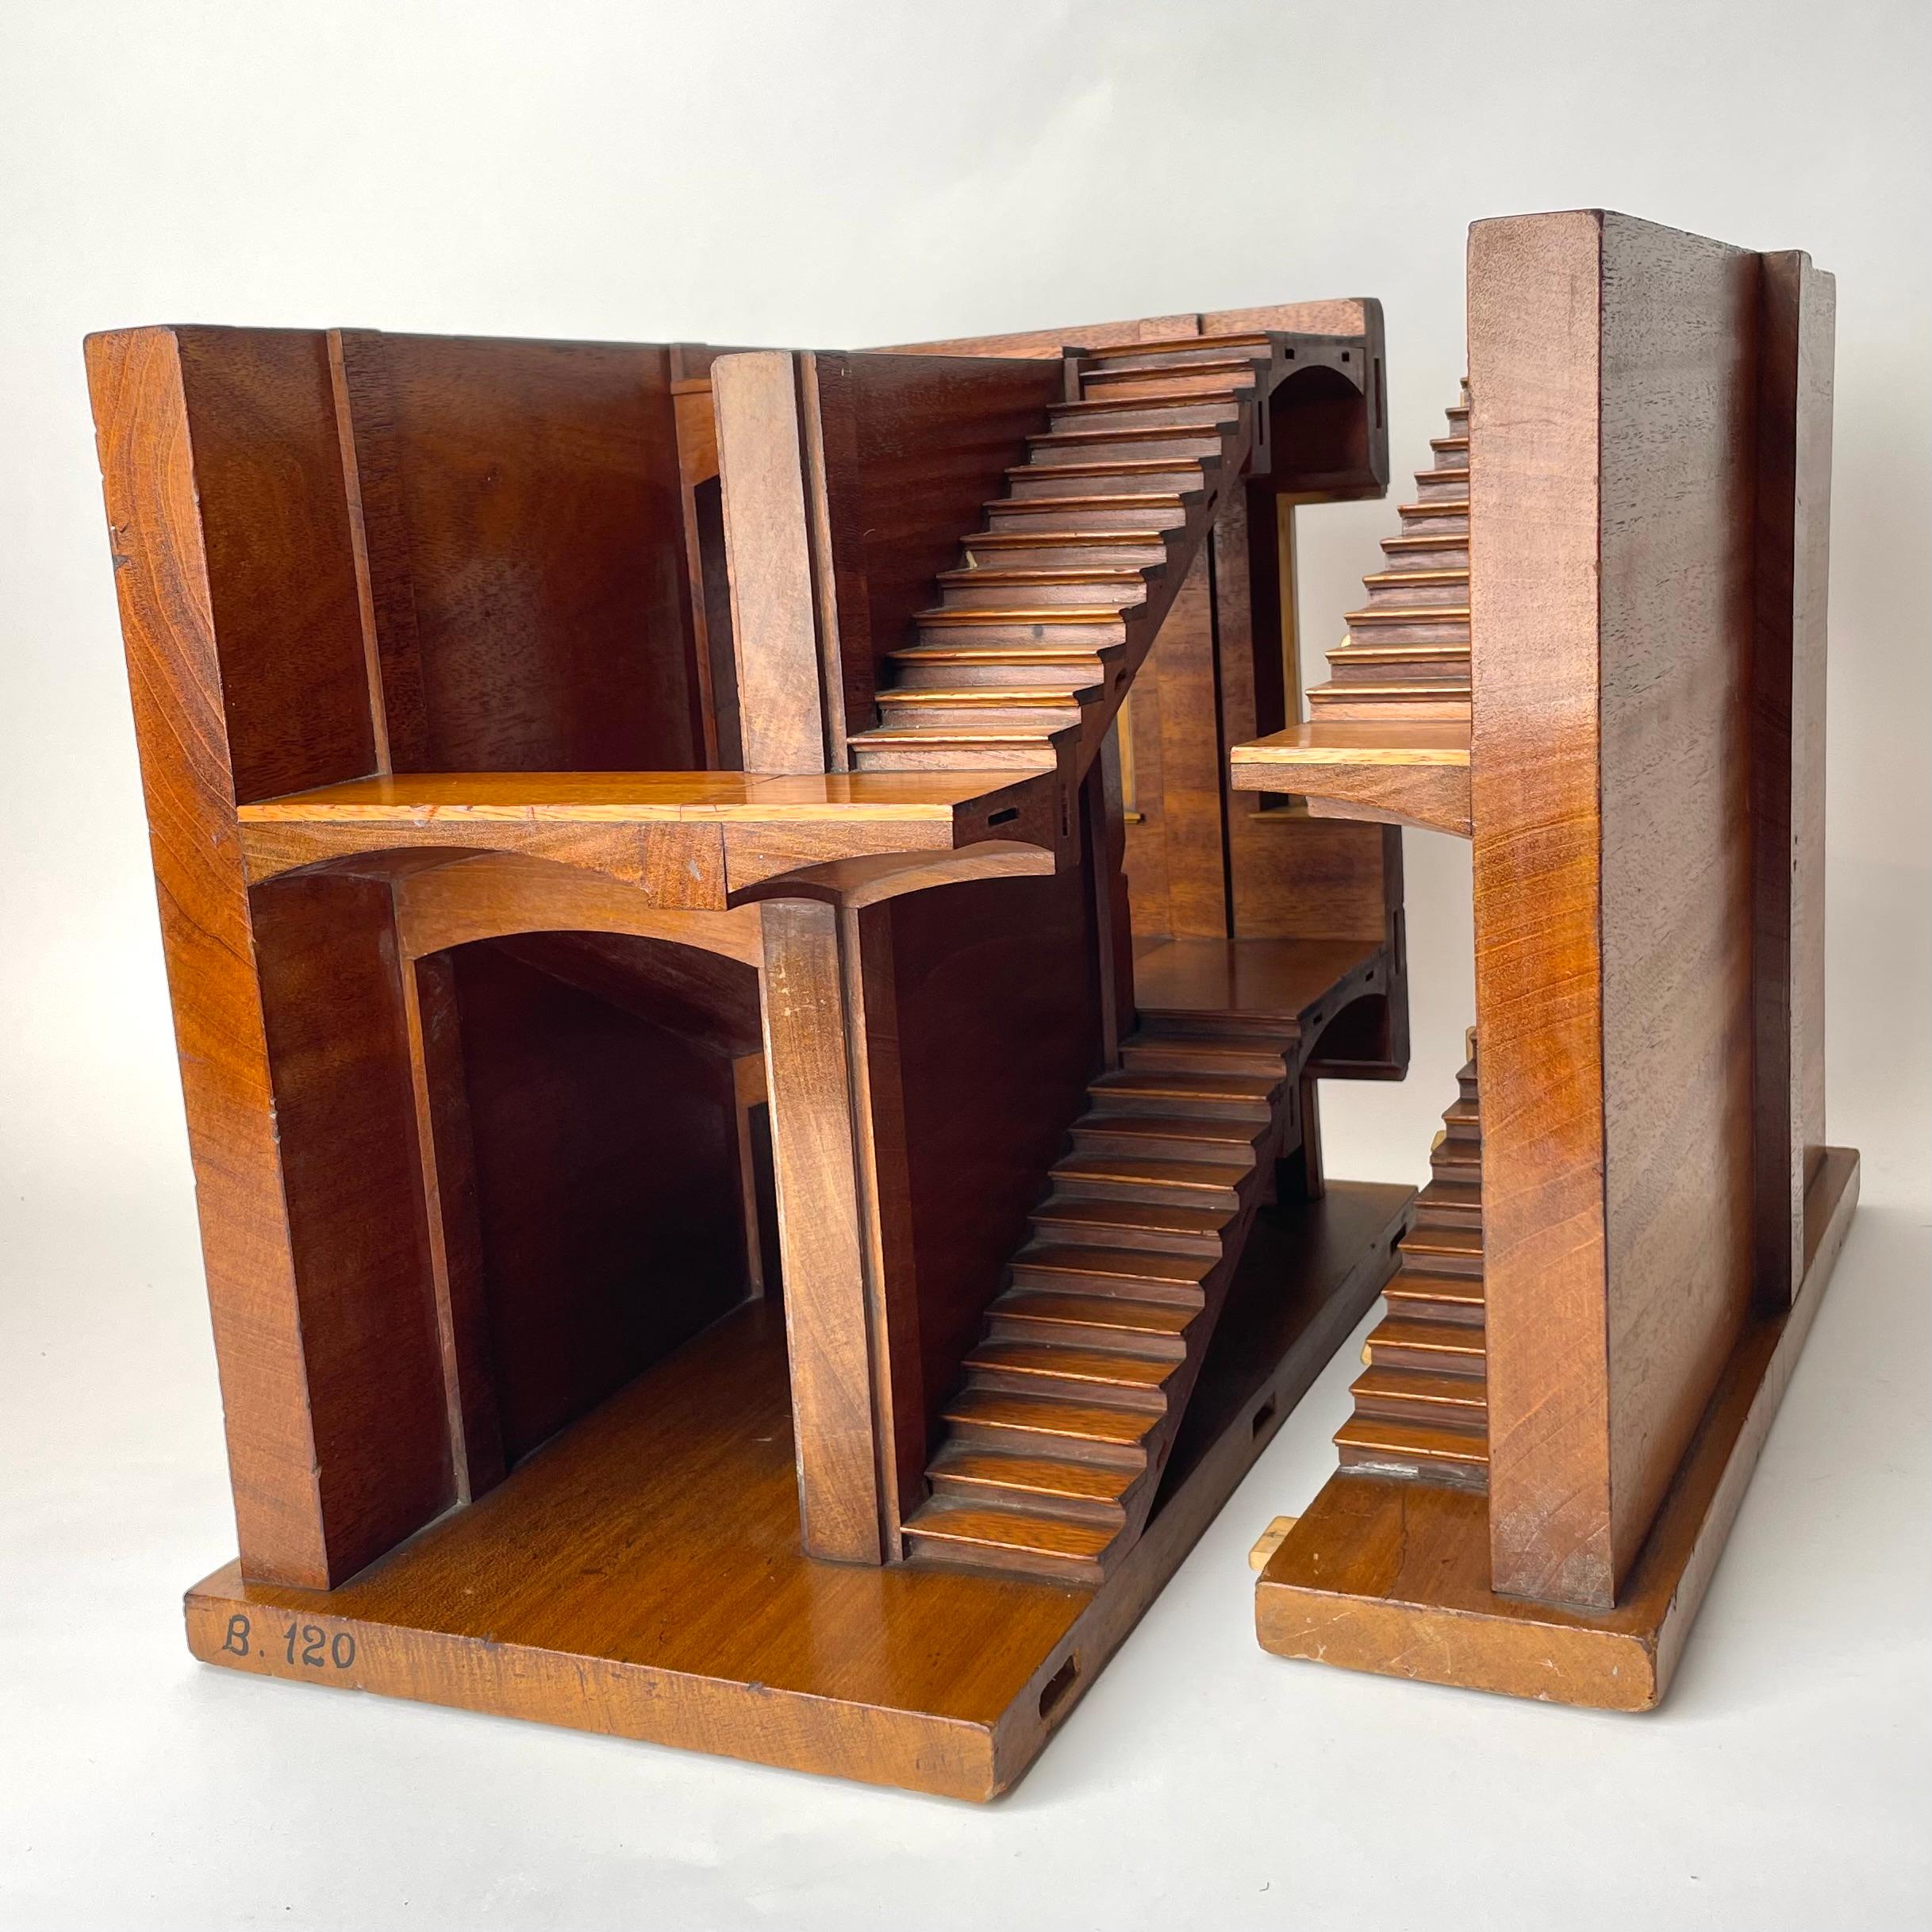 Mahogany Staircase Section Architectural Model, Late 19th/Early 20th C England. Possibly for Educational Purposes or Architectural Competitions.

A beautifully detailed staircase section model for architecture in mahogany (Swietania Mahagoni from